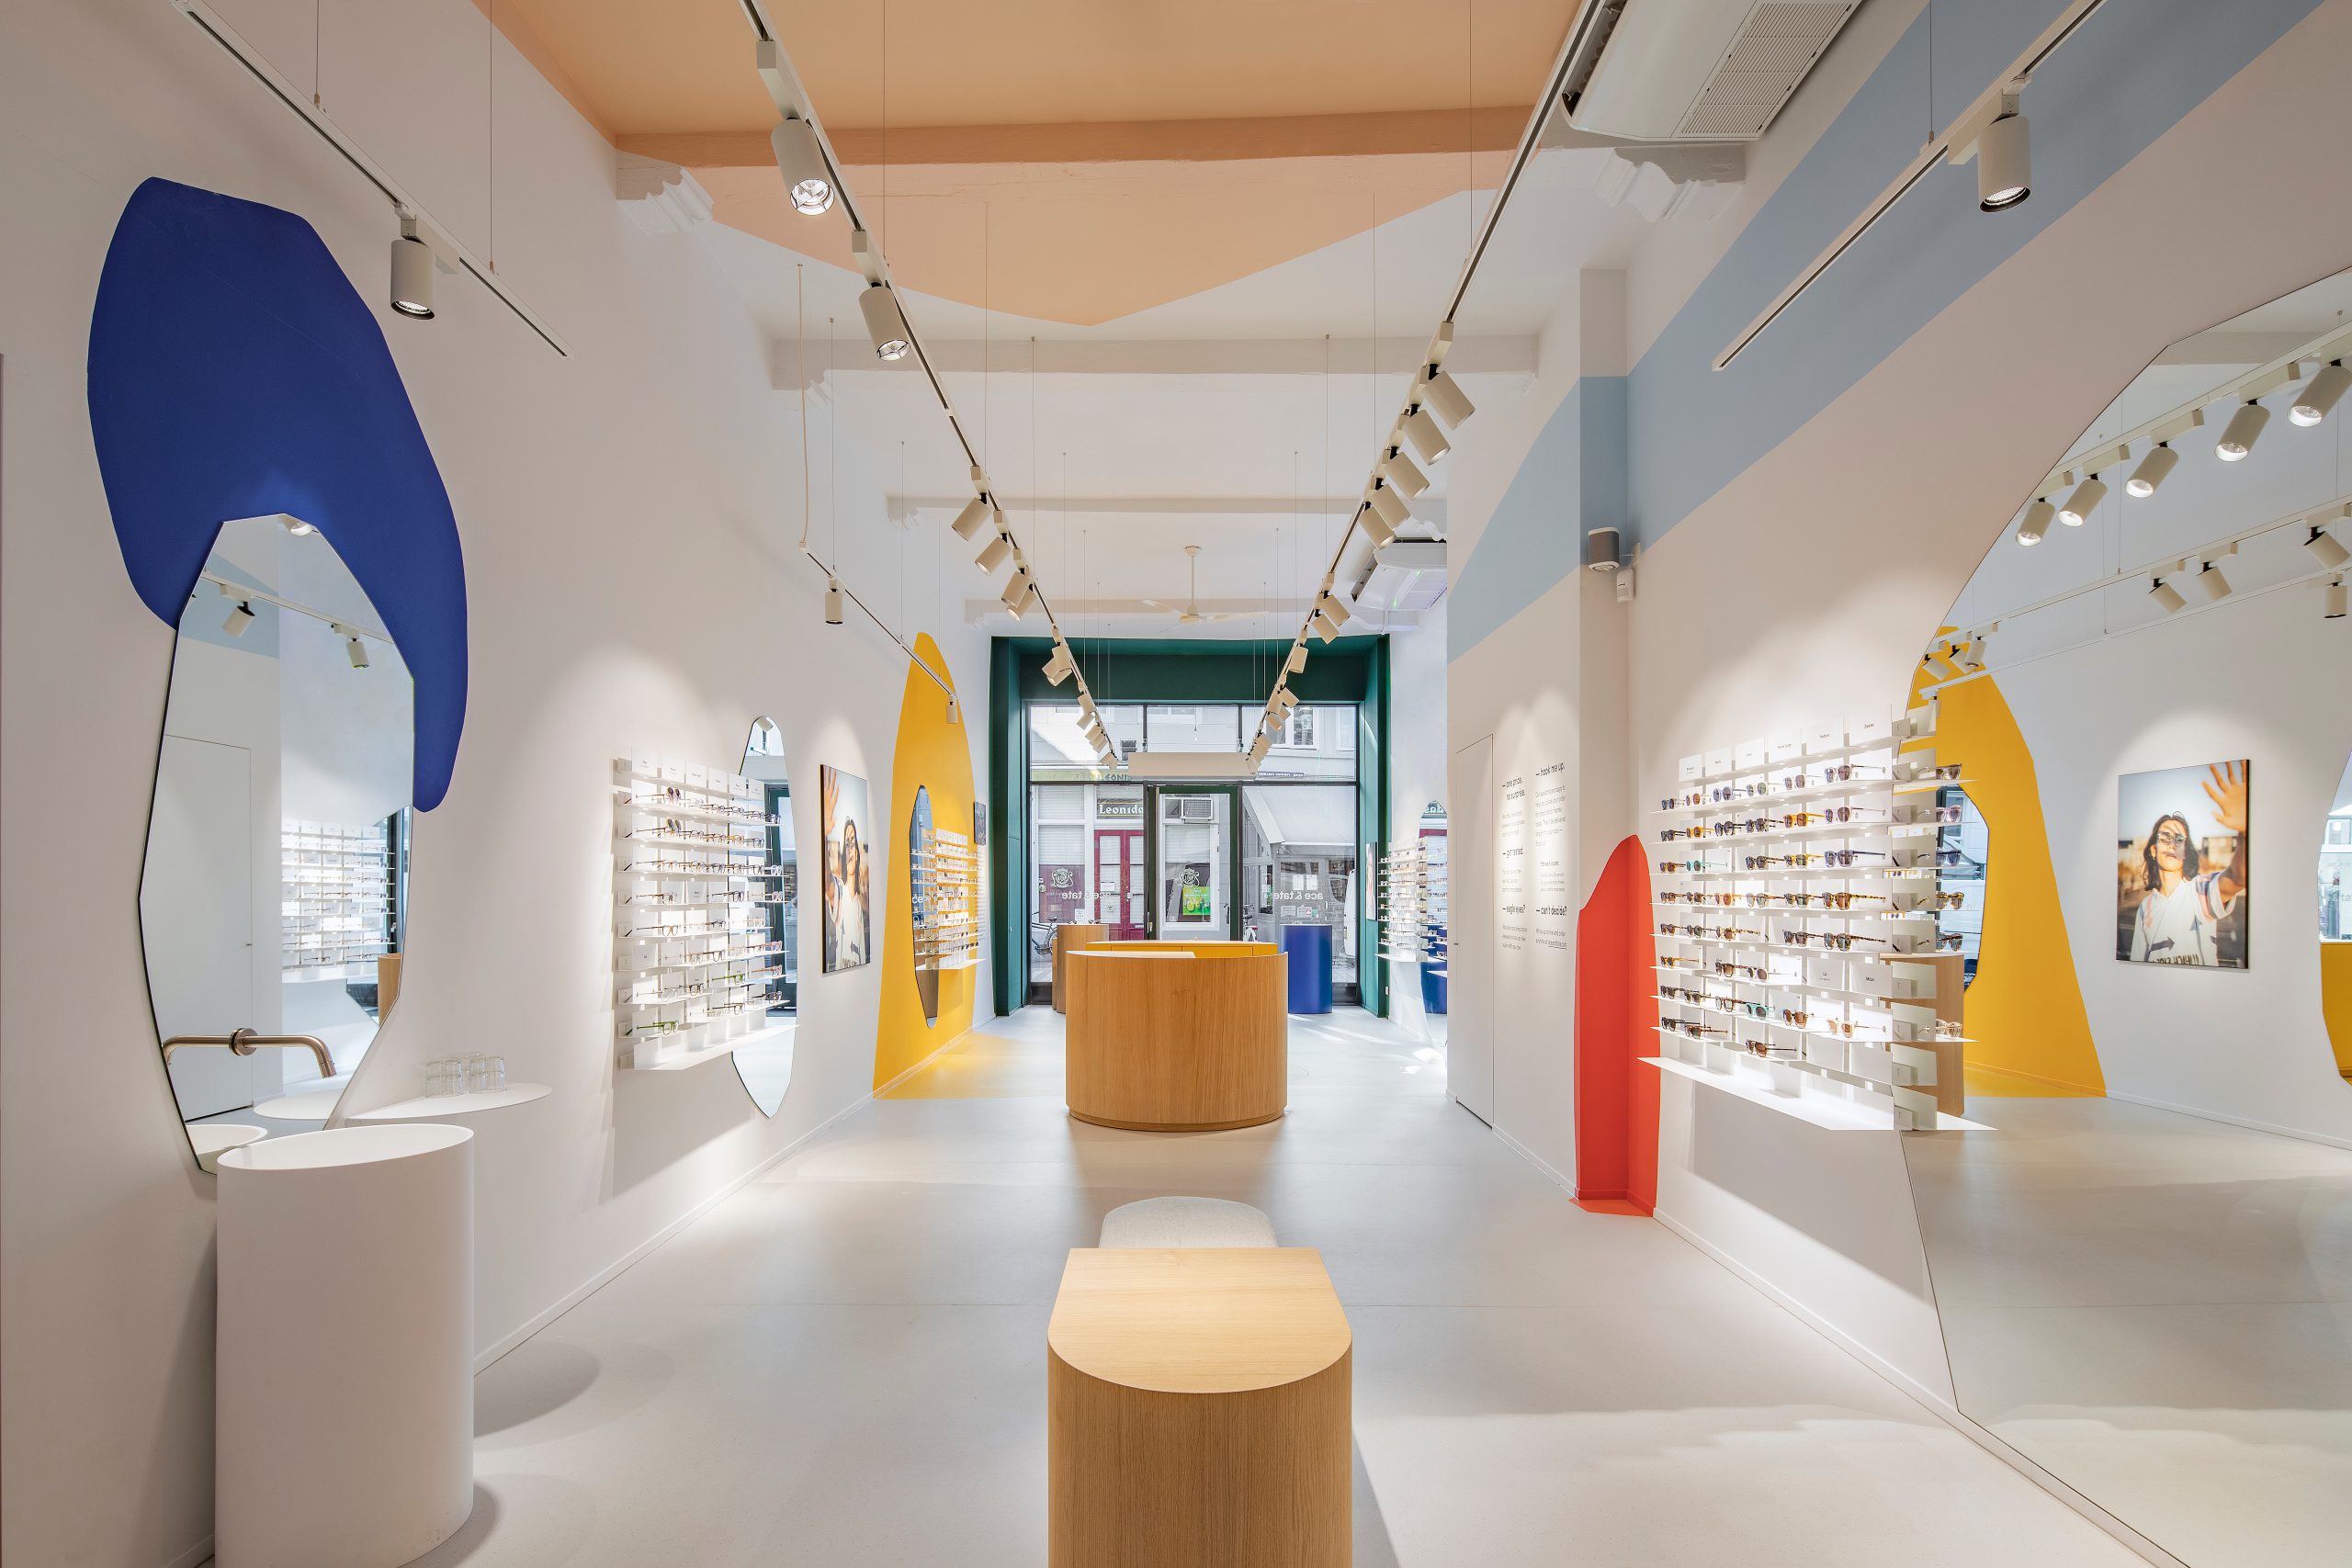 Interior of an eyeglasses store, decorated in reference to the paintings of Hieronymus Bosch